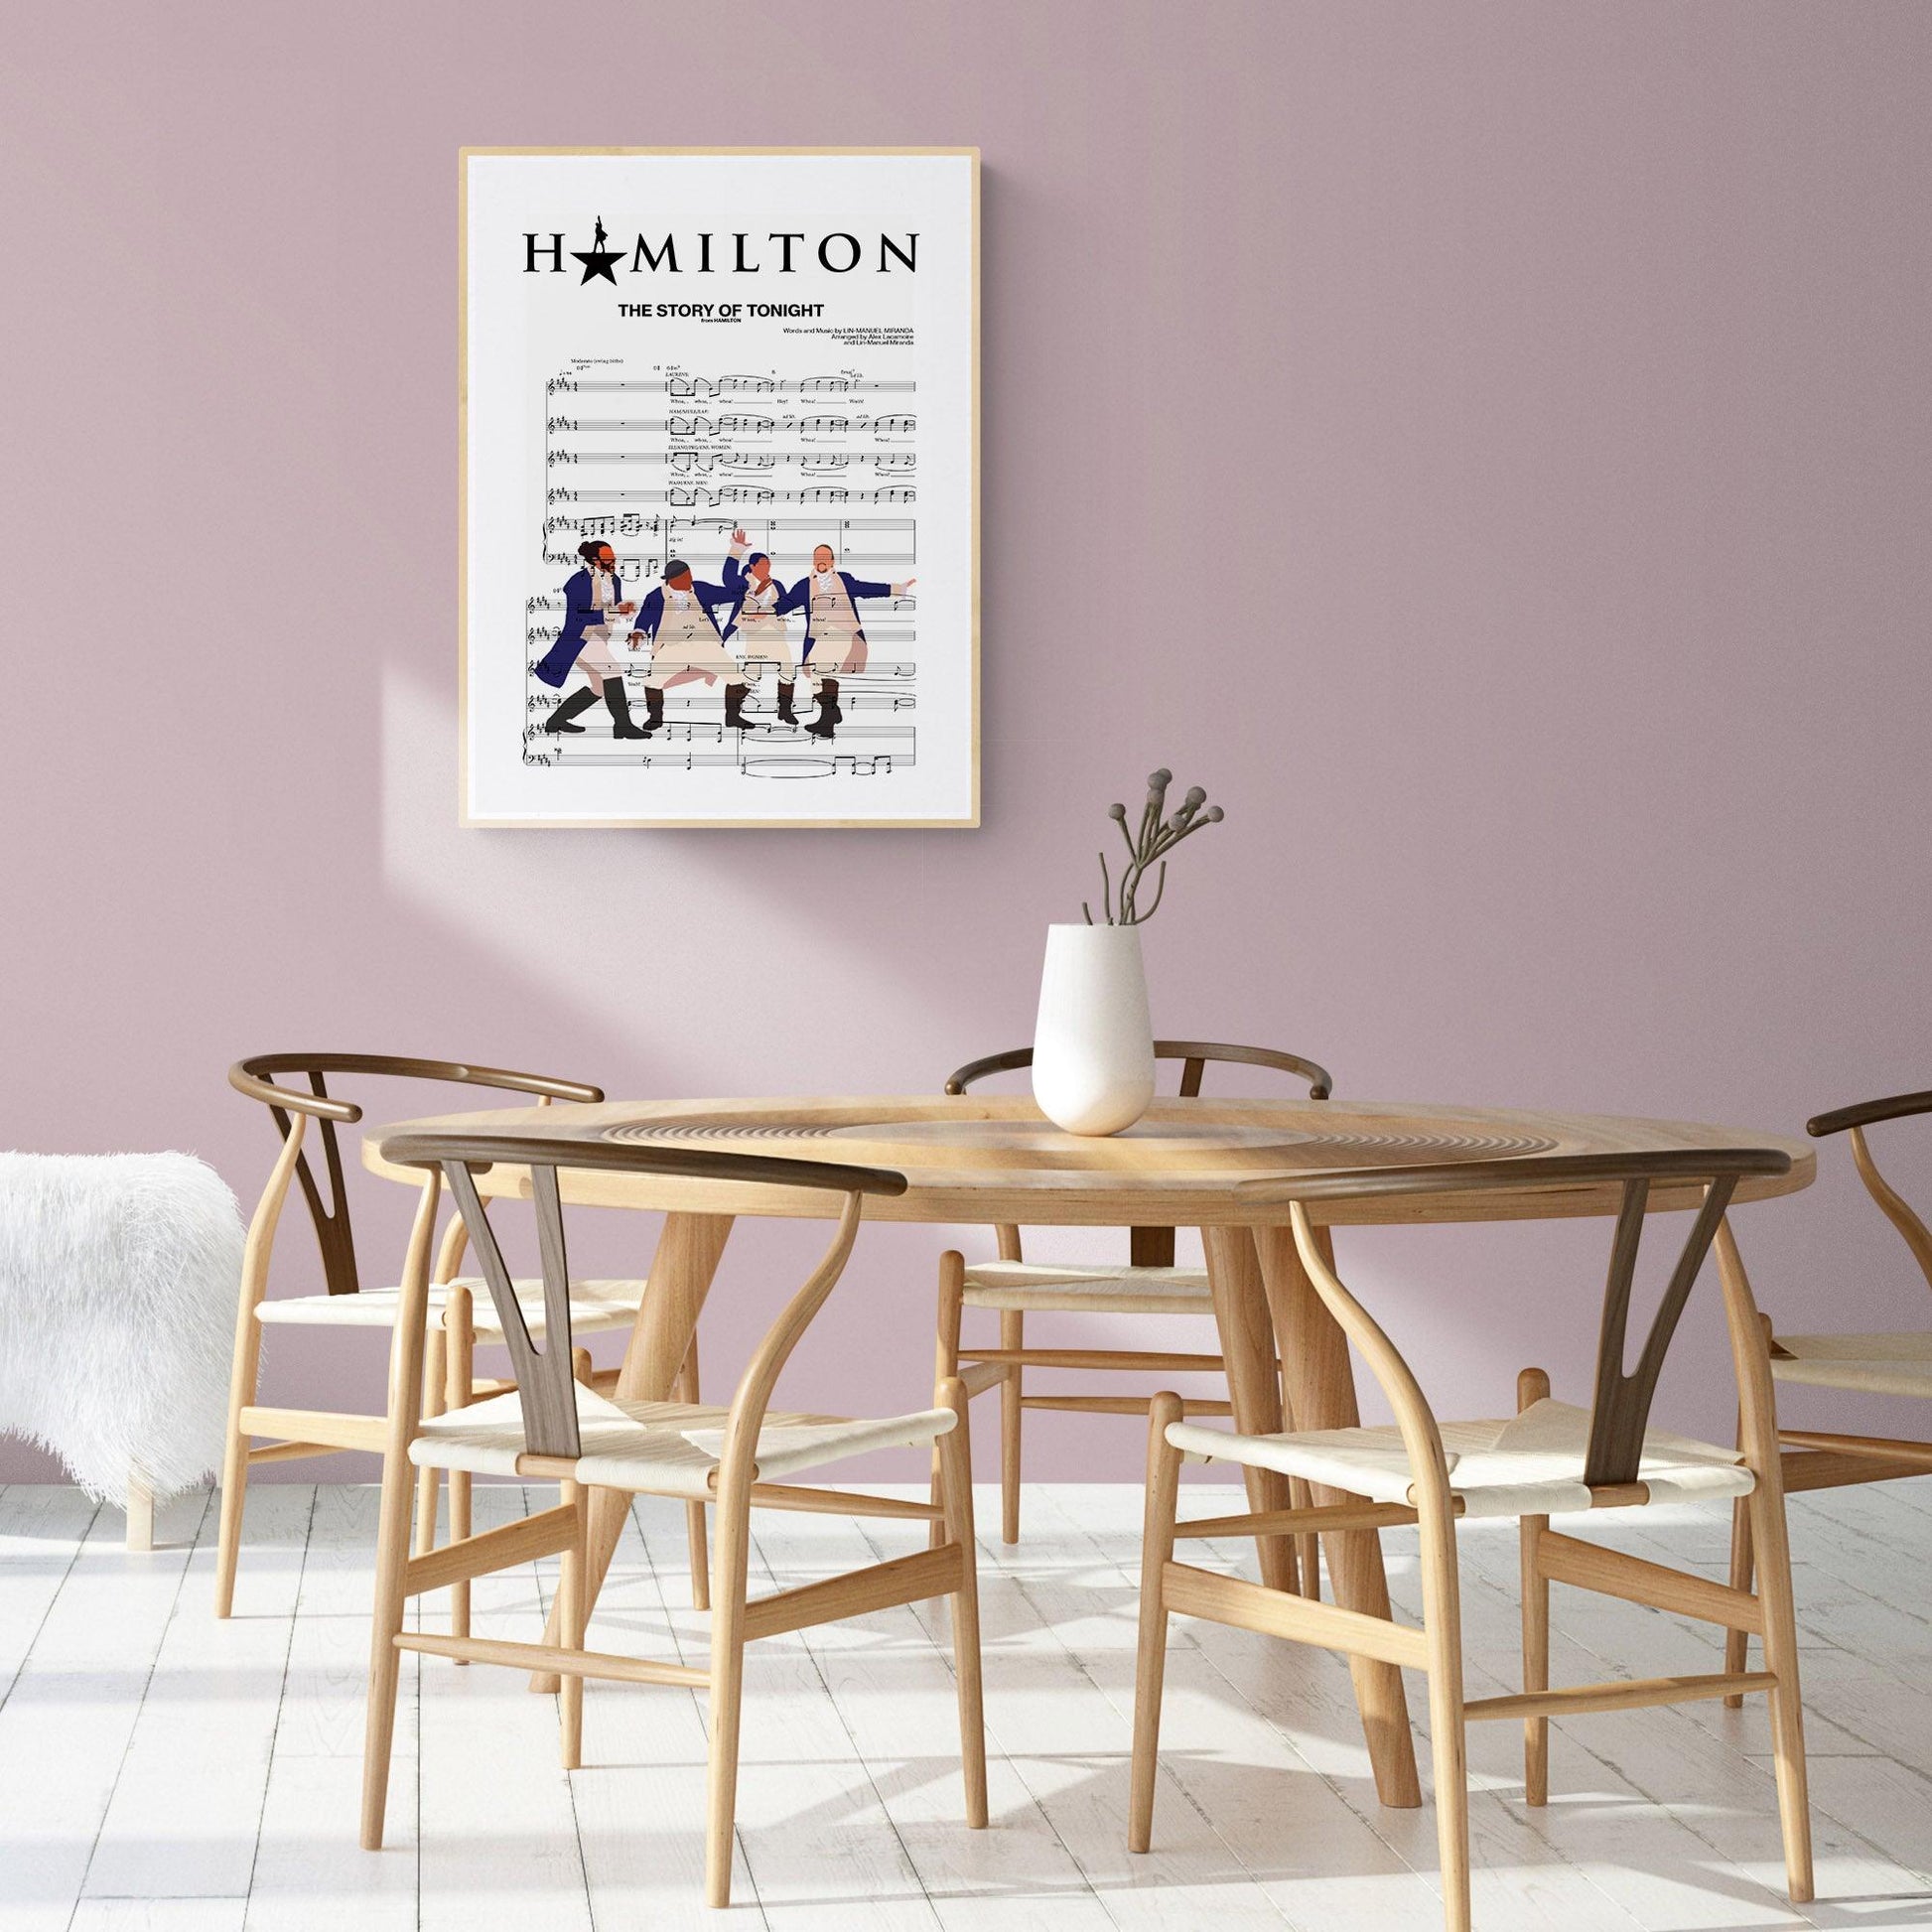 Add a touch of elegance to your space with this Hamilton - THE STORY OF TONIGHT Poster. Printed in a unique design, this poster is perfect for any Hamilton fan or music lover. Showcasing the Hamilton logo and font, it will bring a bit of Broadway flair to your wall art collection. With its high-quality materials and bold colors, this official poster from 98Types Music is sure to make an impact. Get ready to be transported to Broadway and beyond with the addition of this Hamilton poster!